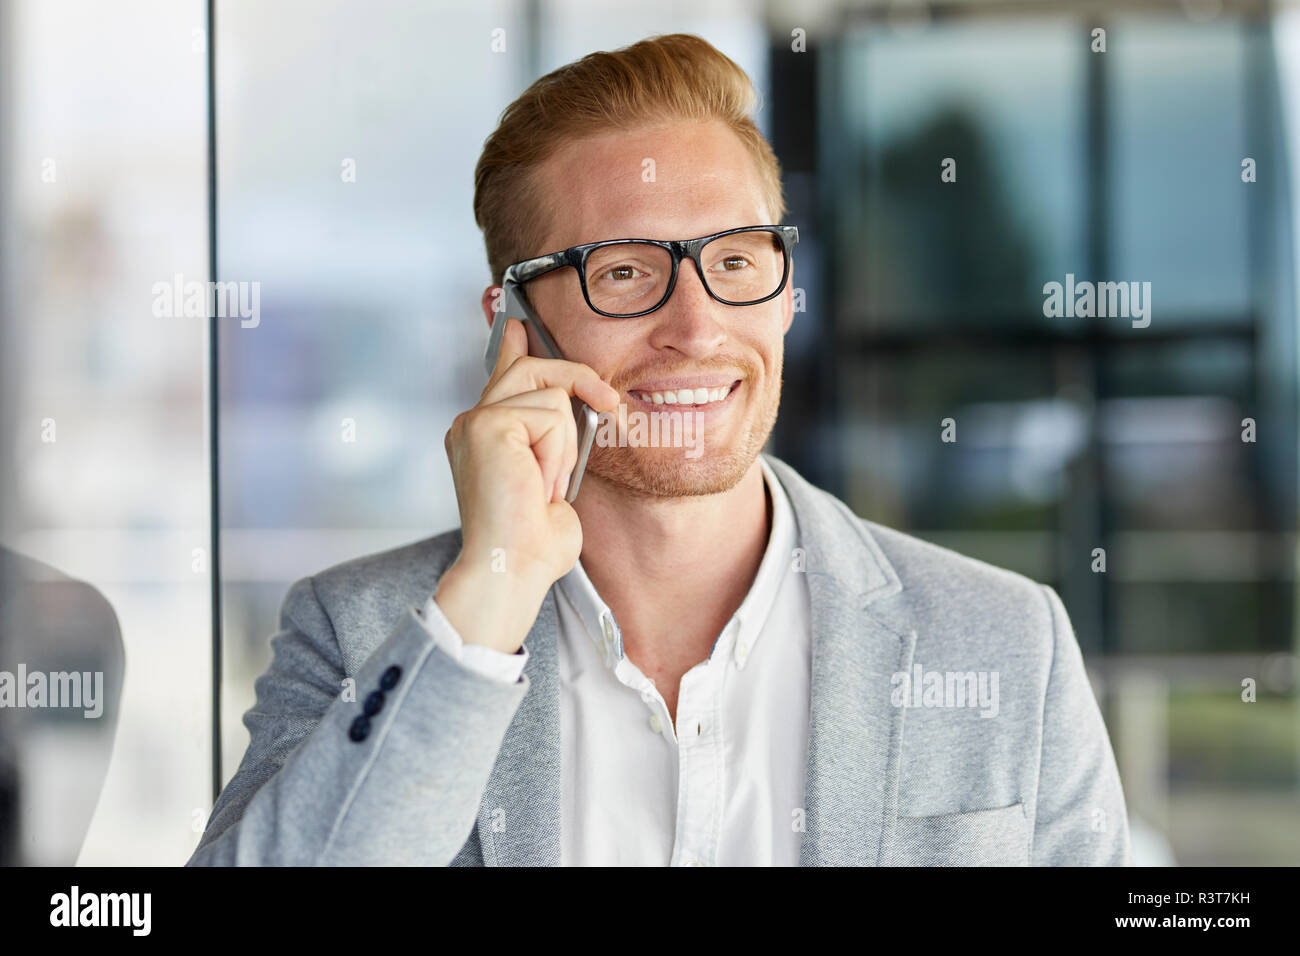 Portrait of smiling redheaded businessman on cell phone Stock Photo